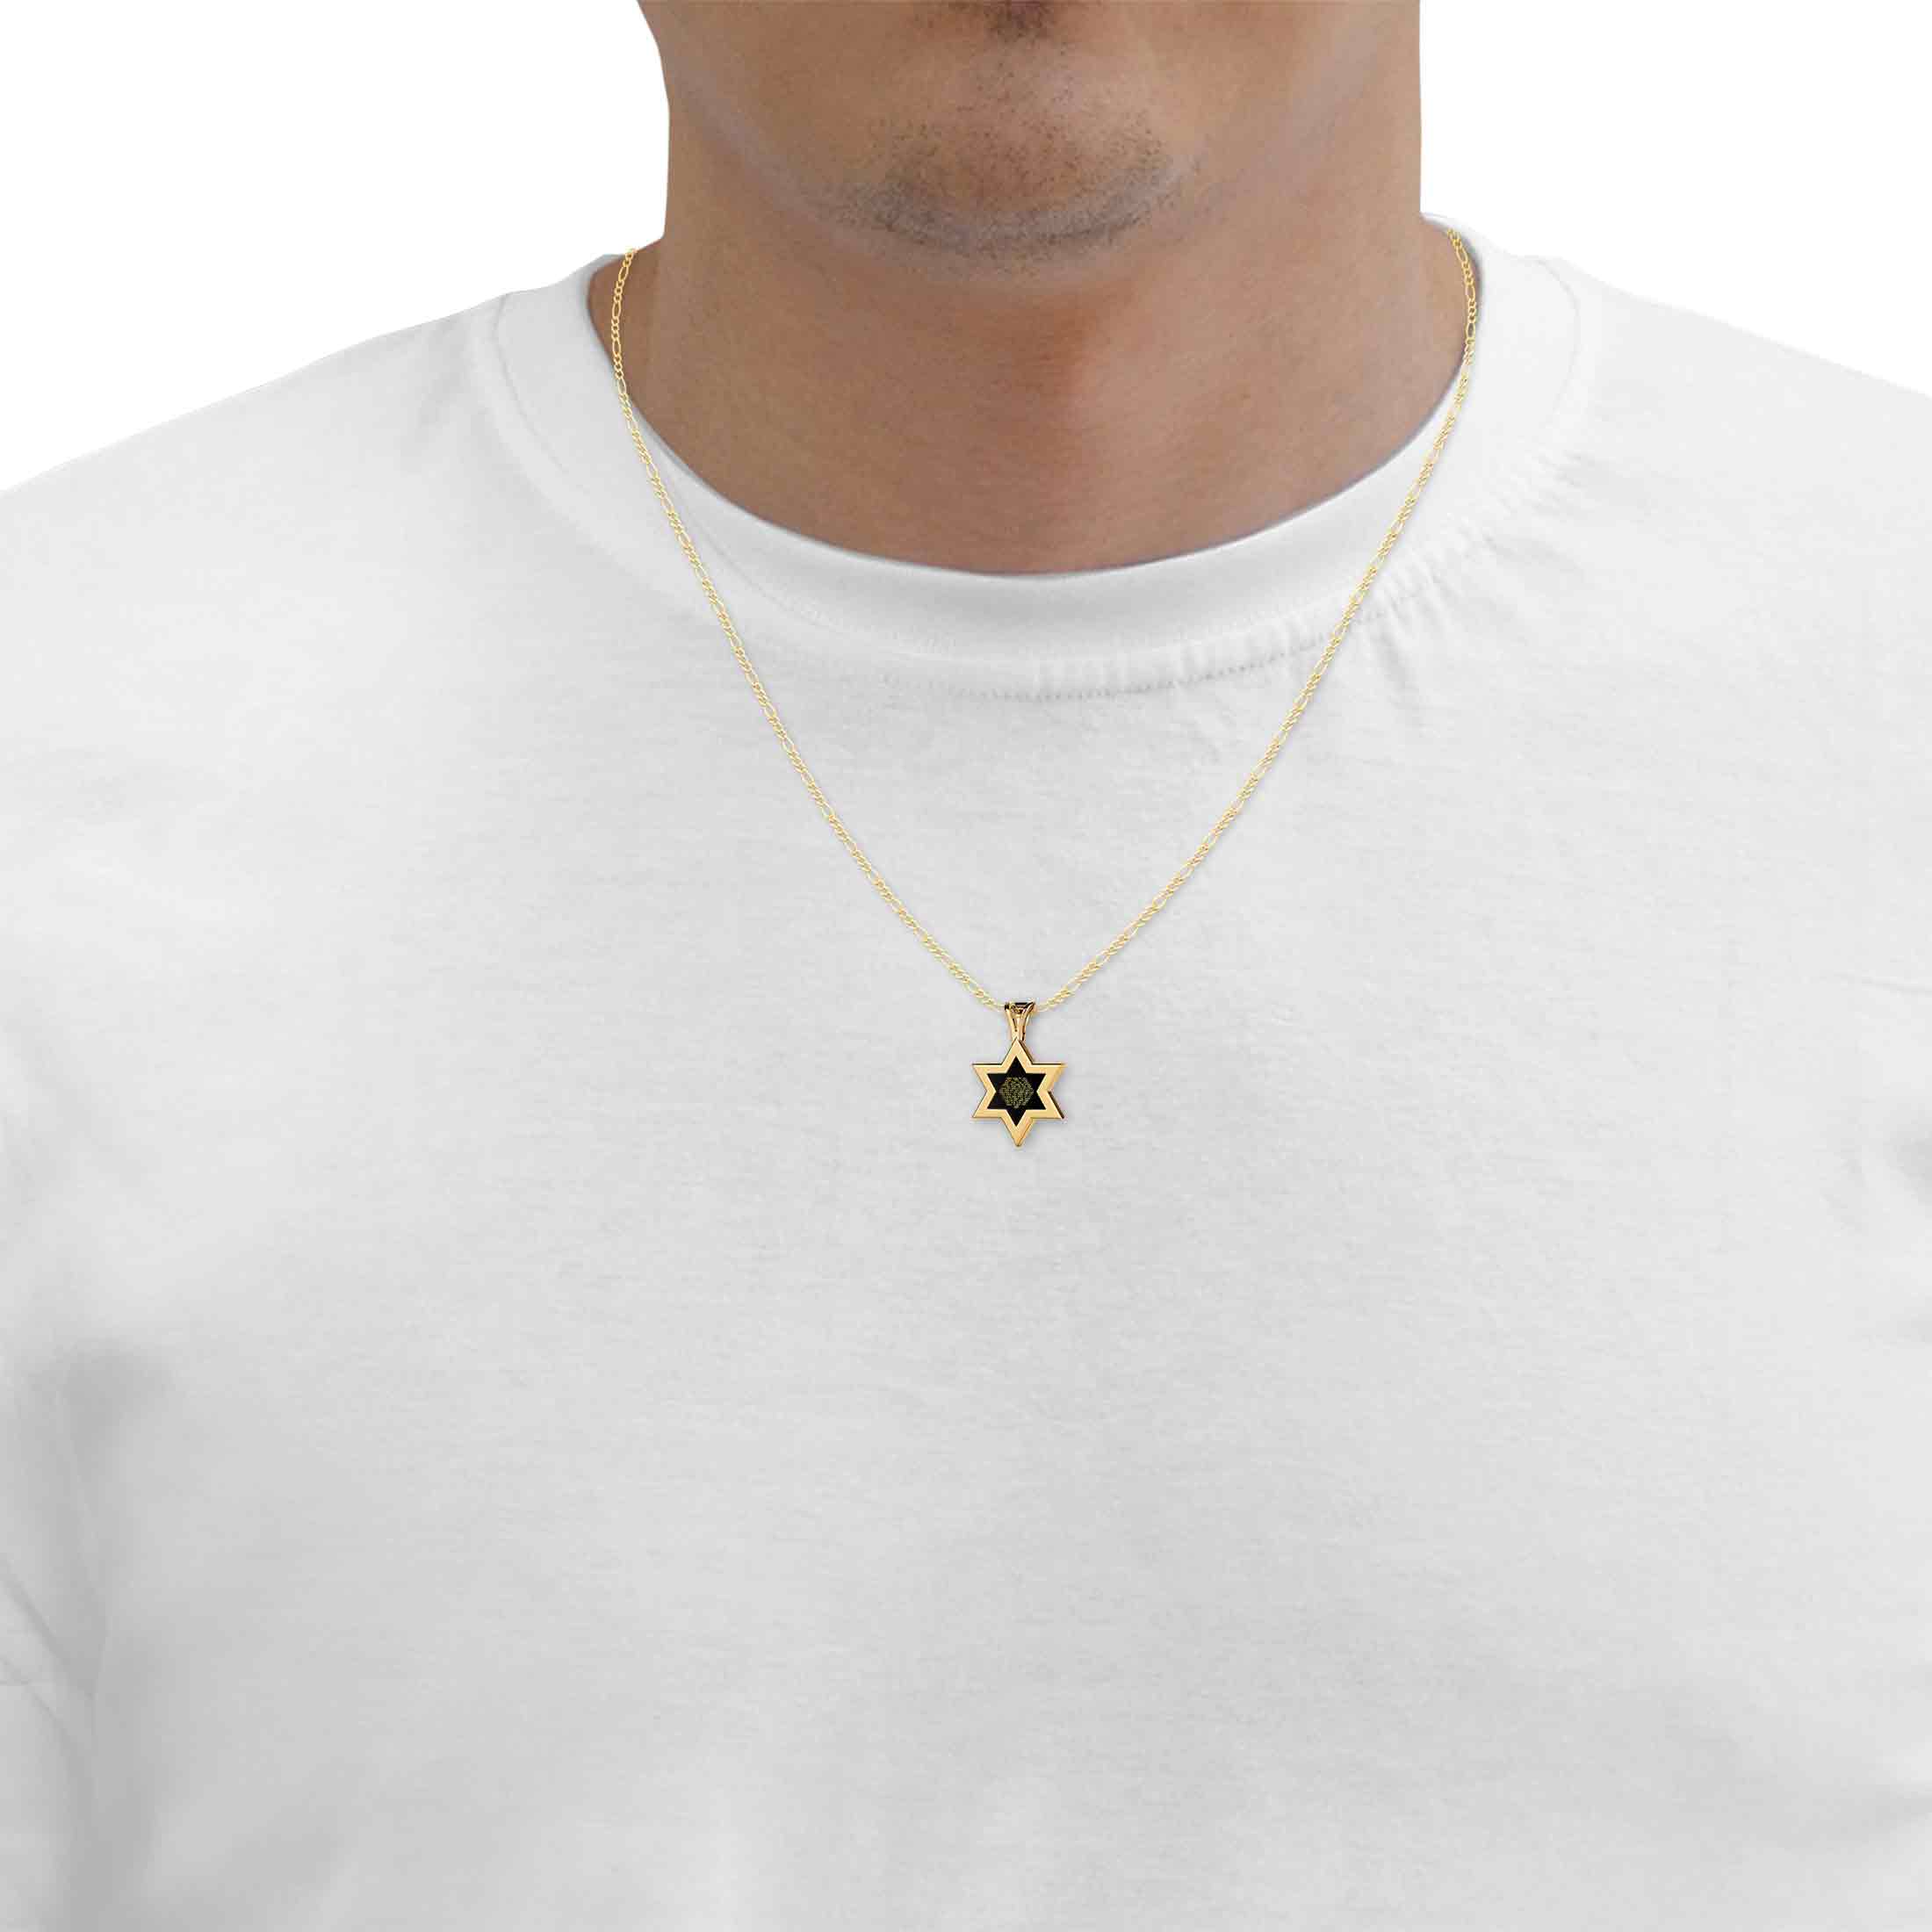 Close-up of a Men's Kabbalah Necklace 72 Names Pendant 24k Gold Inscribed on Onyx Stone set against a black background.